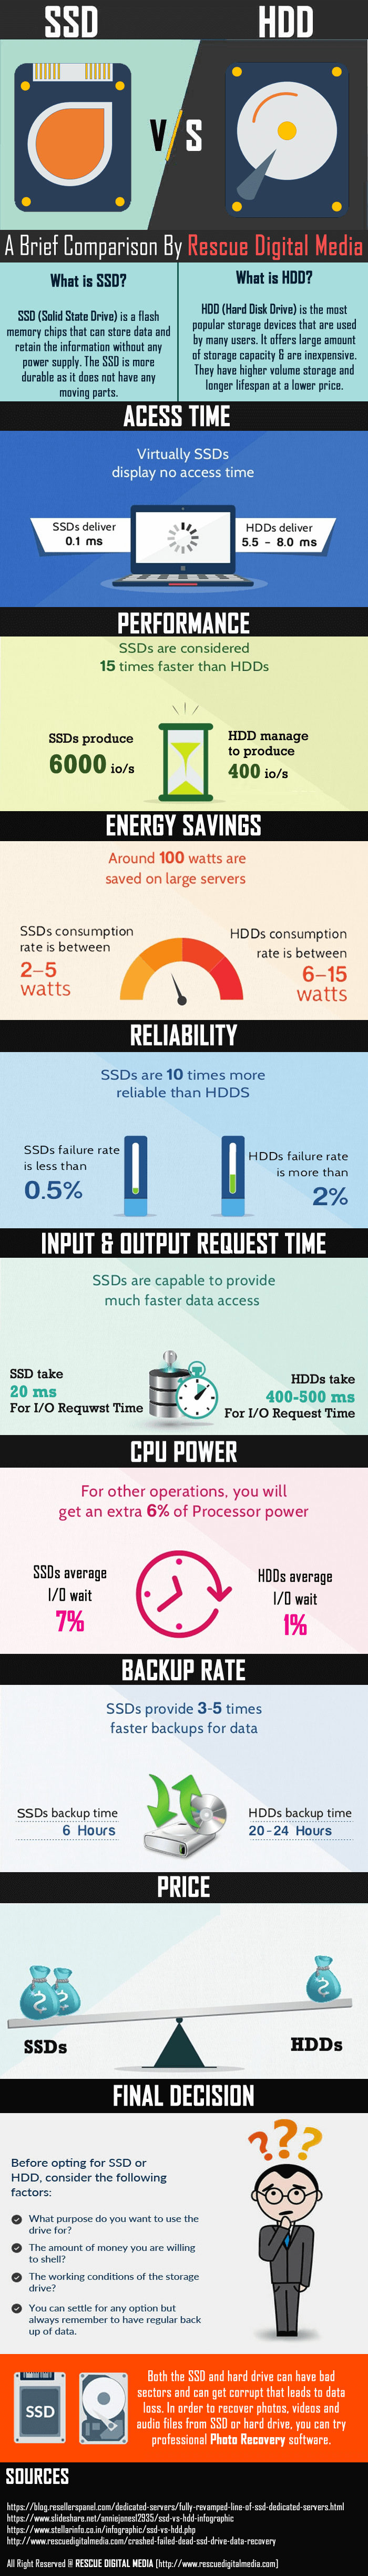 SSD versus HDD Infographic